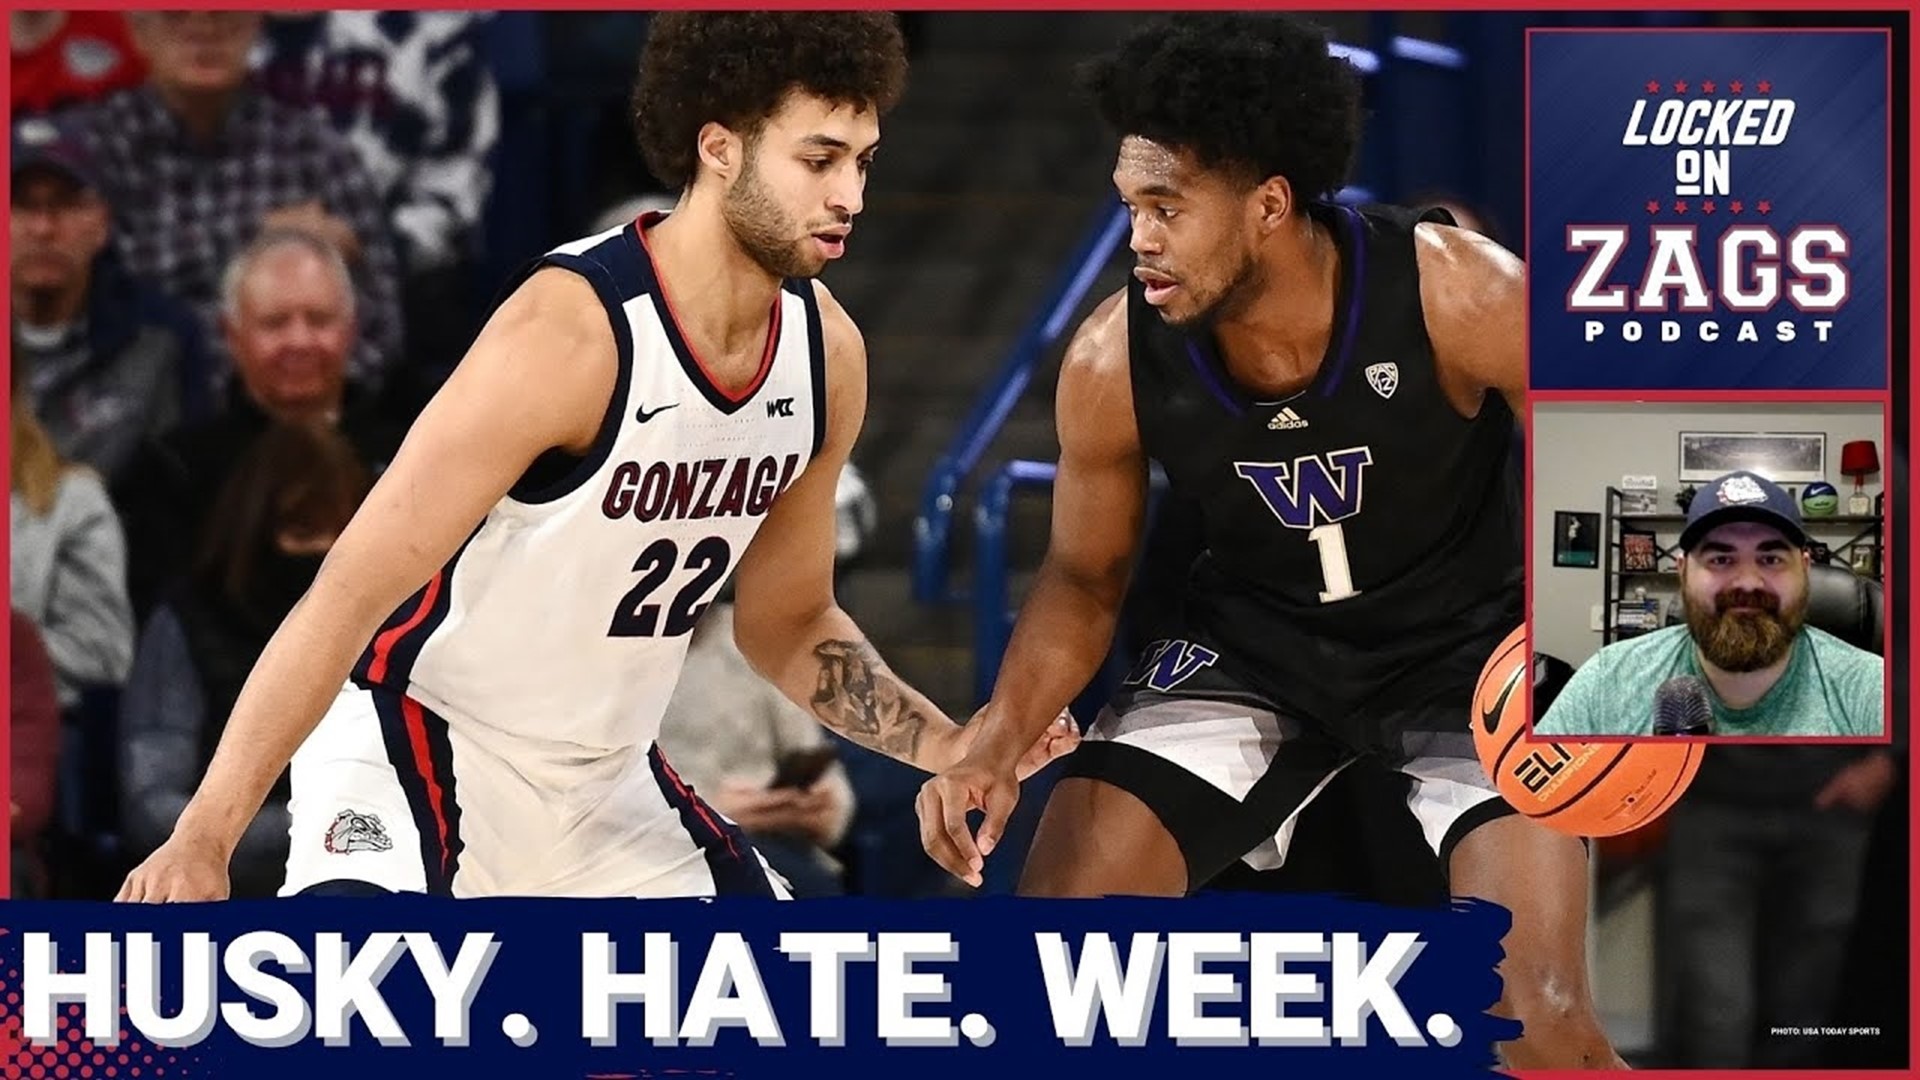 Mark Few and the Gonzaga Bulldogs will head to Seattle to take on the 5-3 Washington Huskies in their first true road game of the season.